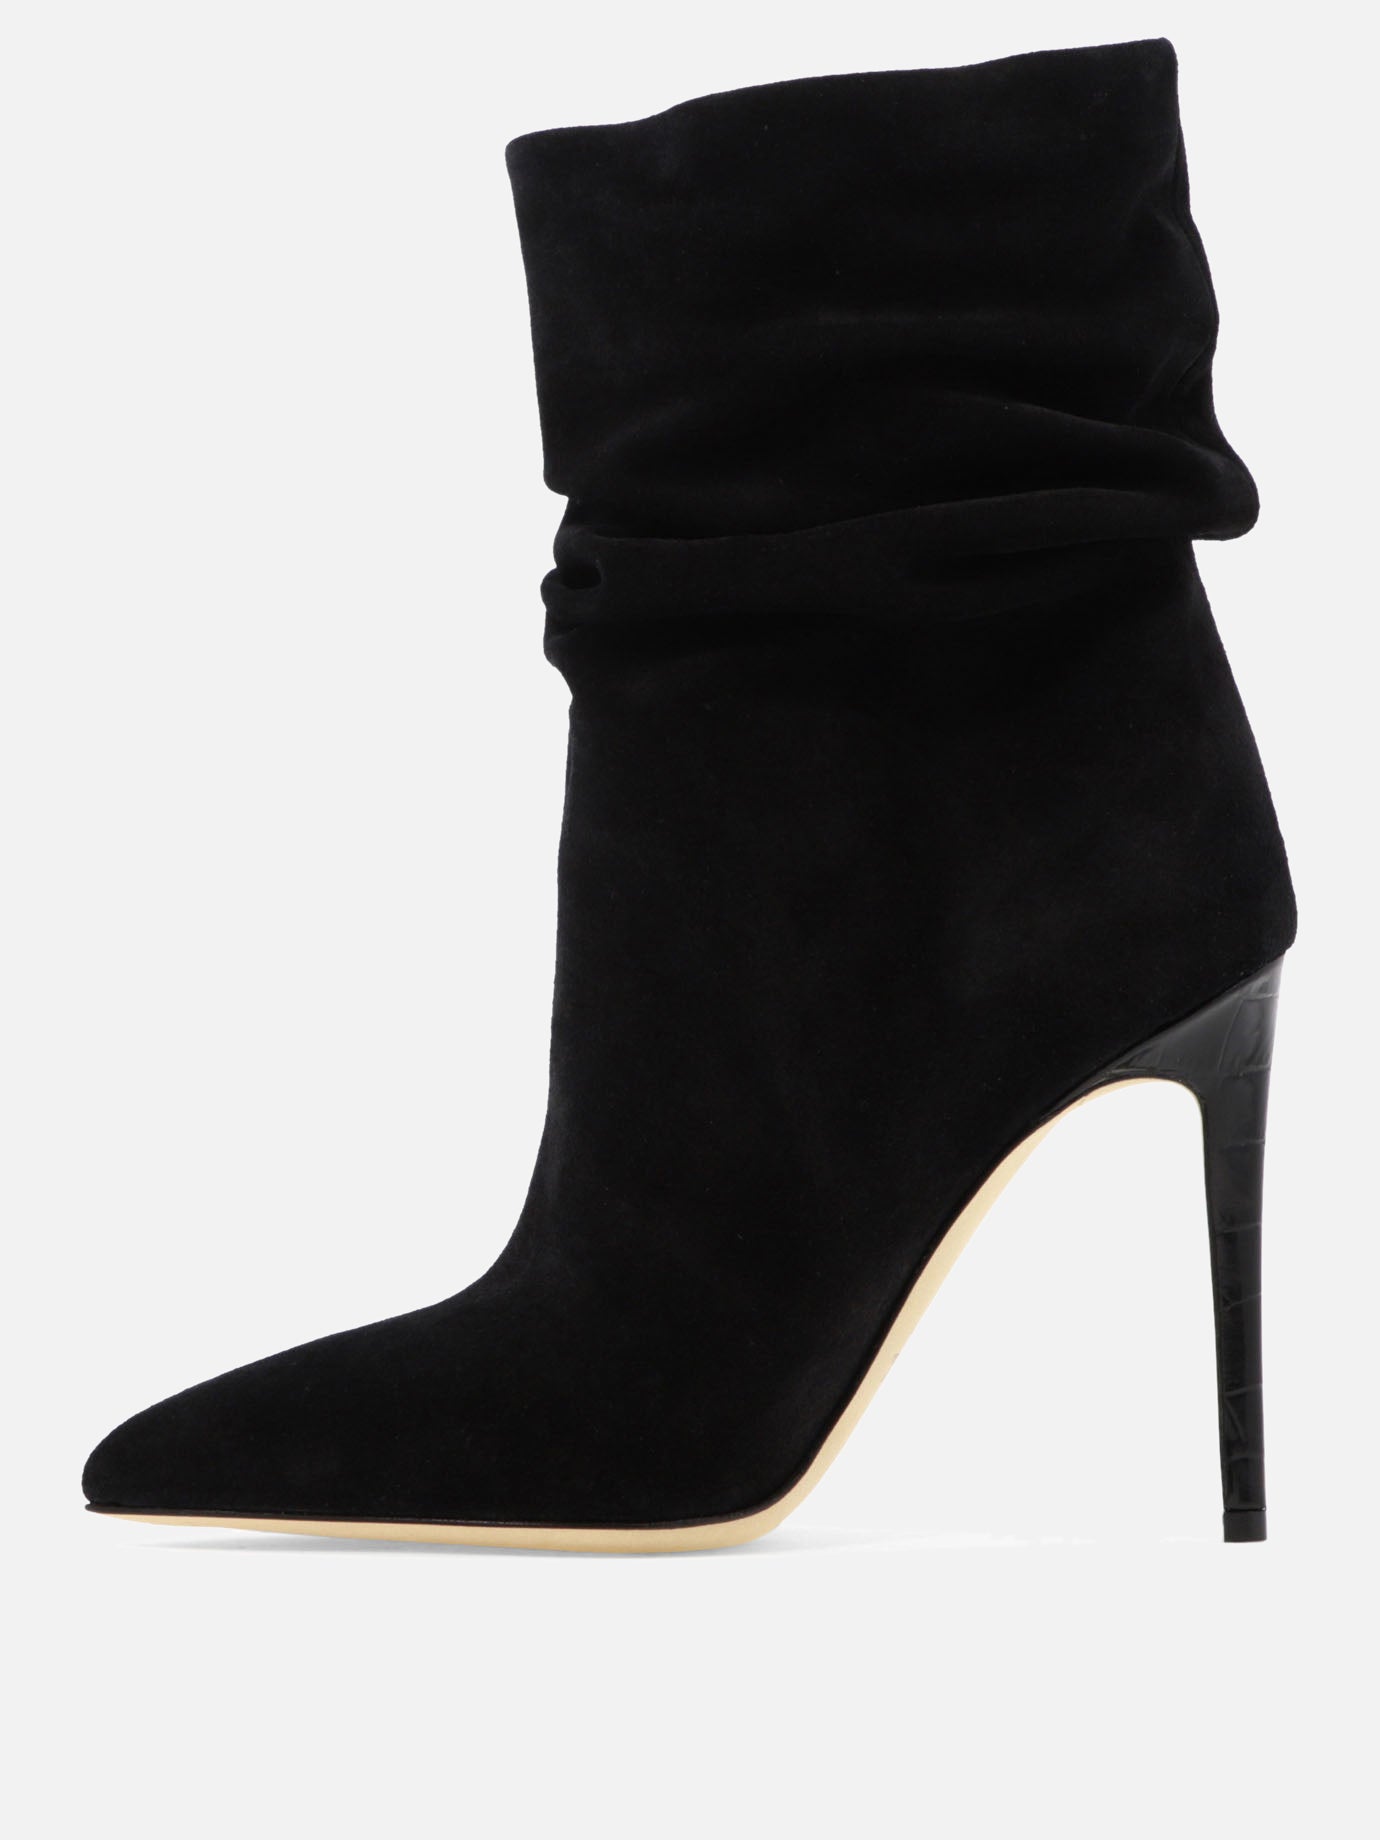 "Slouchy" ankle boots